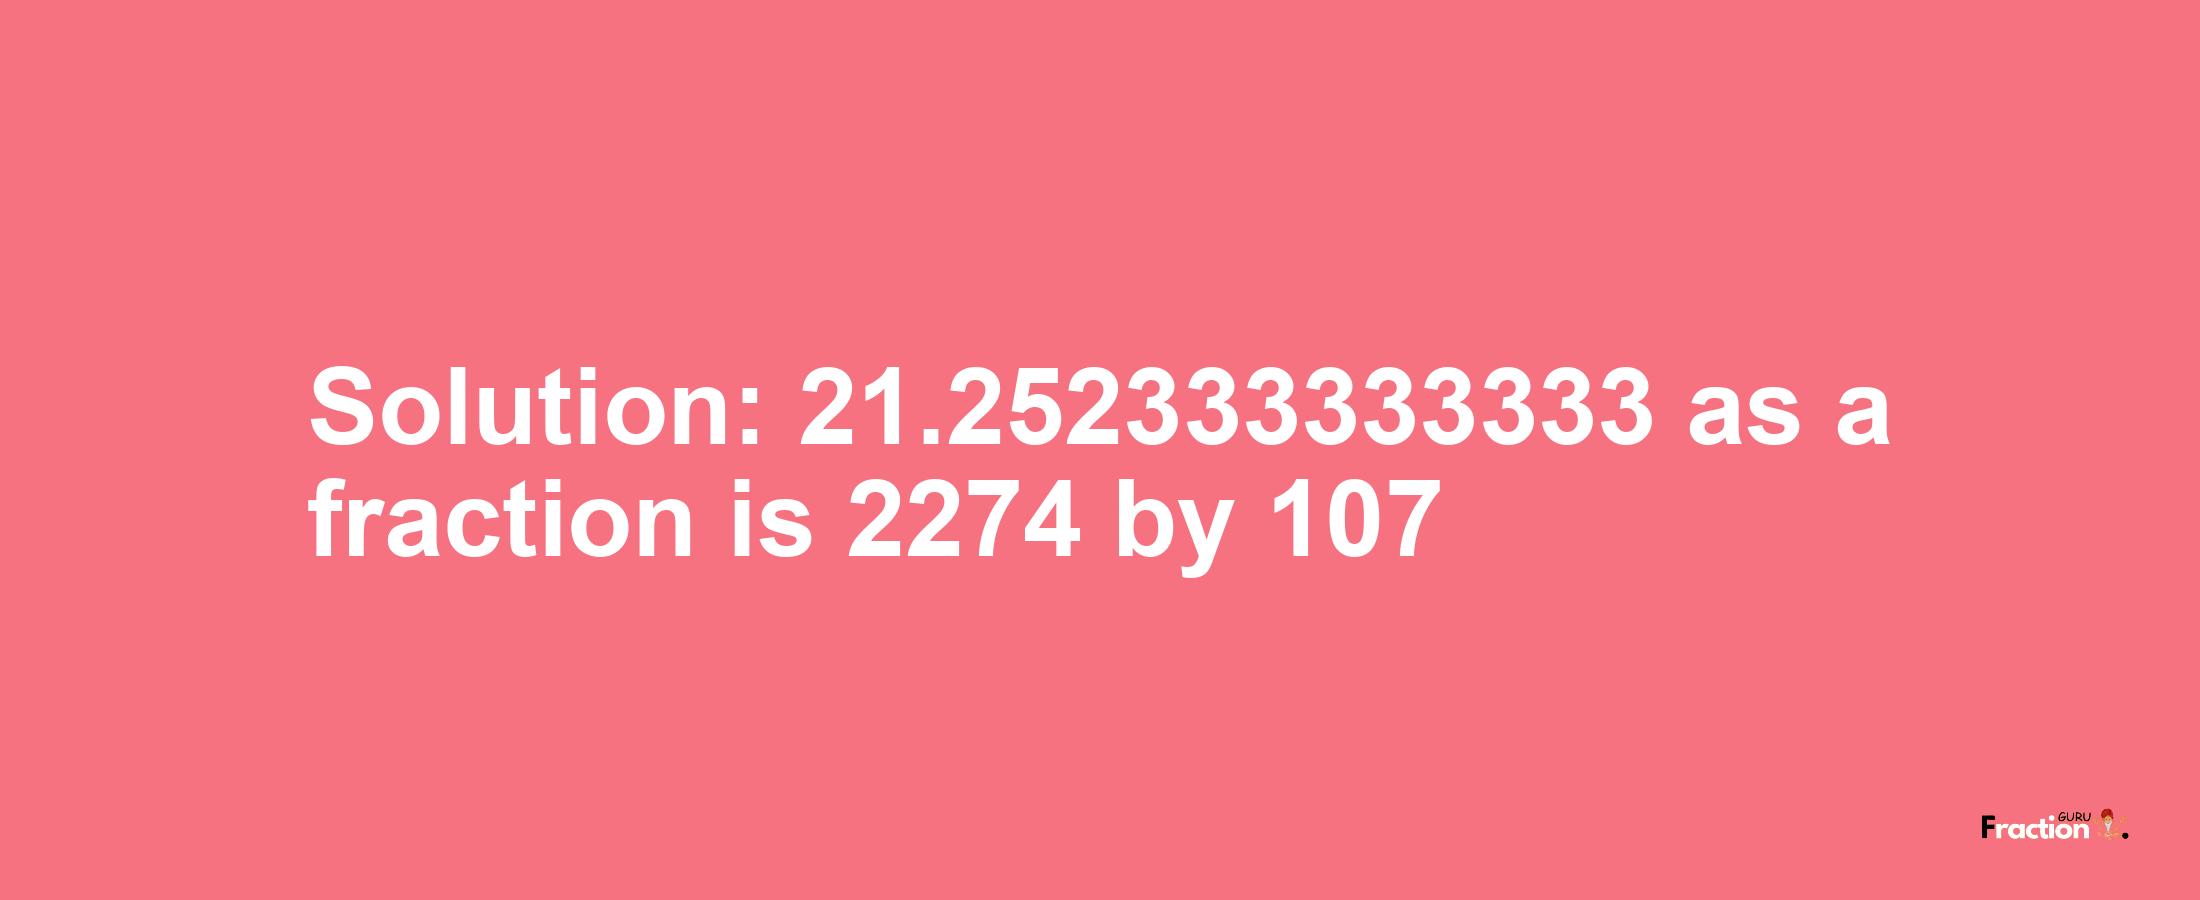 Solution:21.252333333333 as a fraction is 2274/107